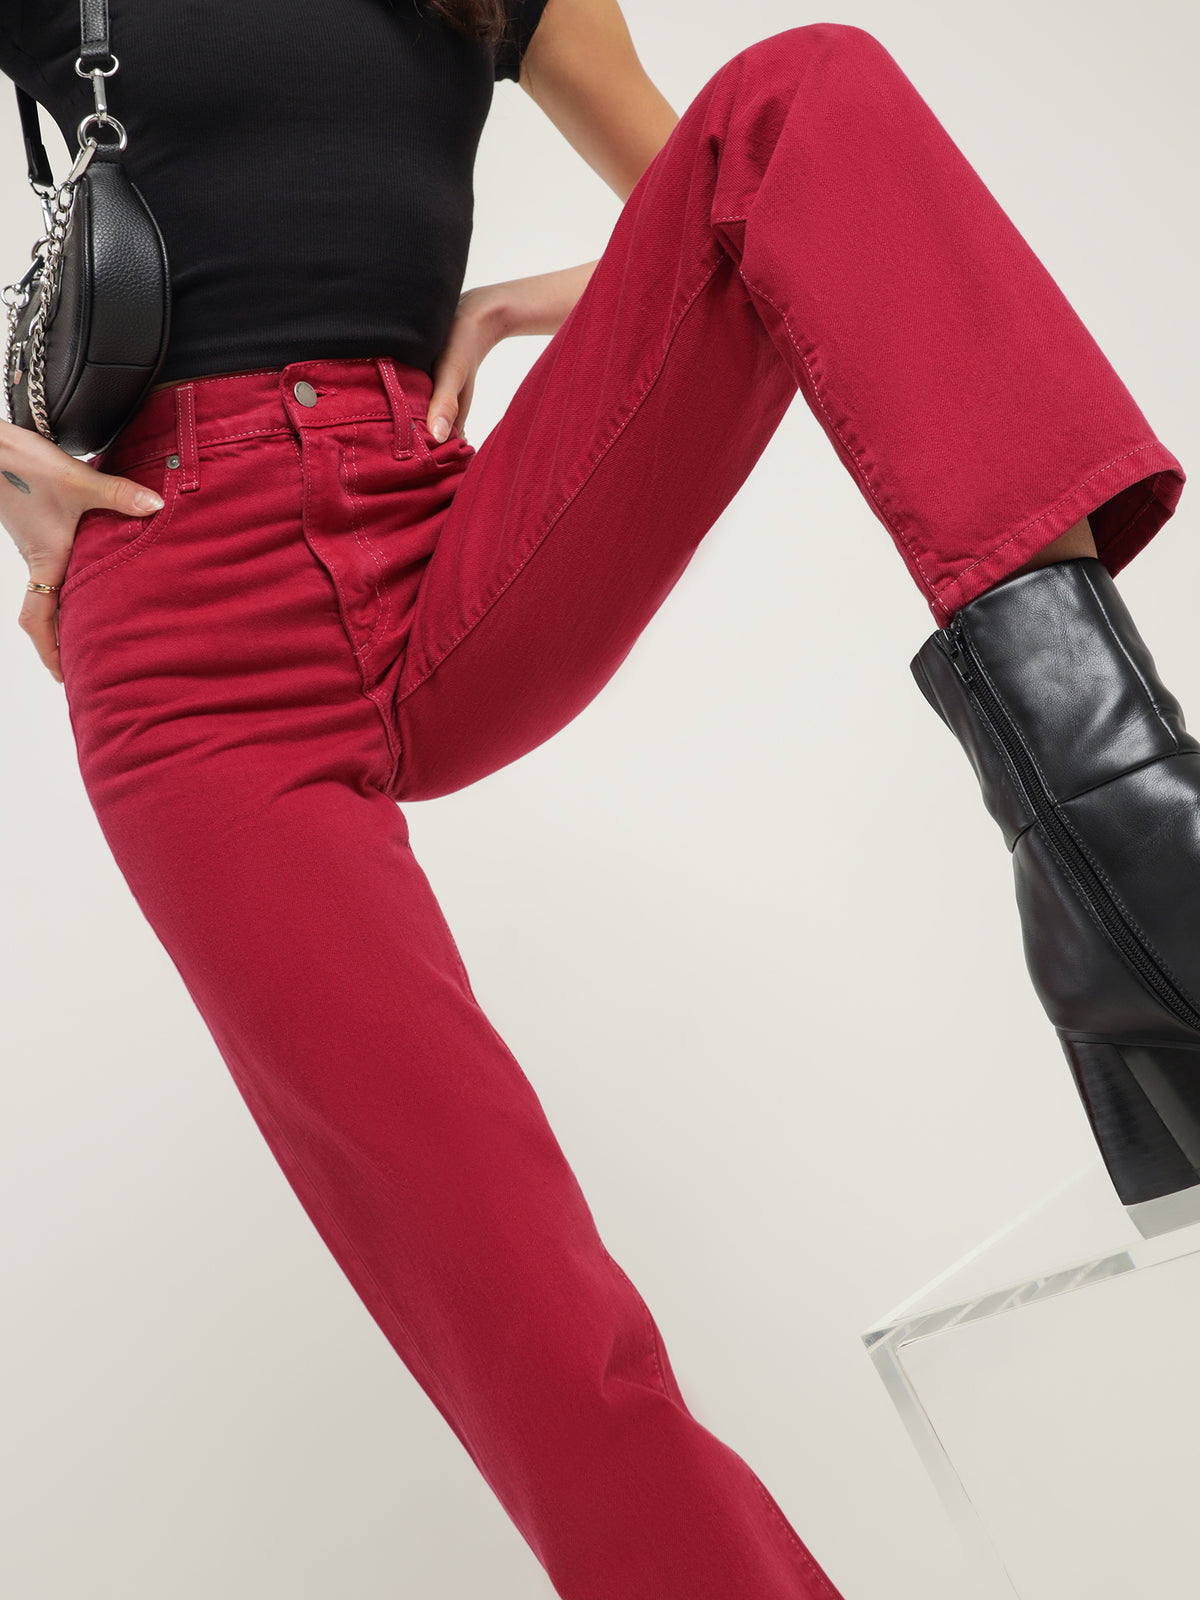 Andi Jeans in Cherry Red